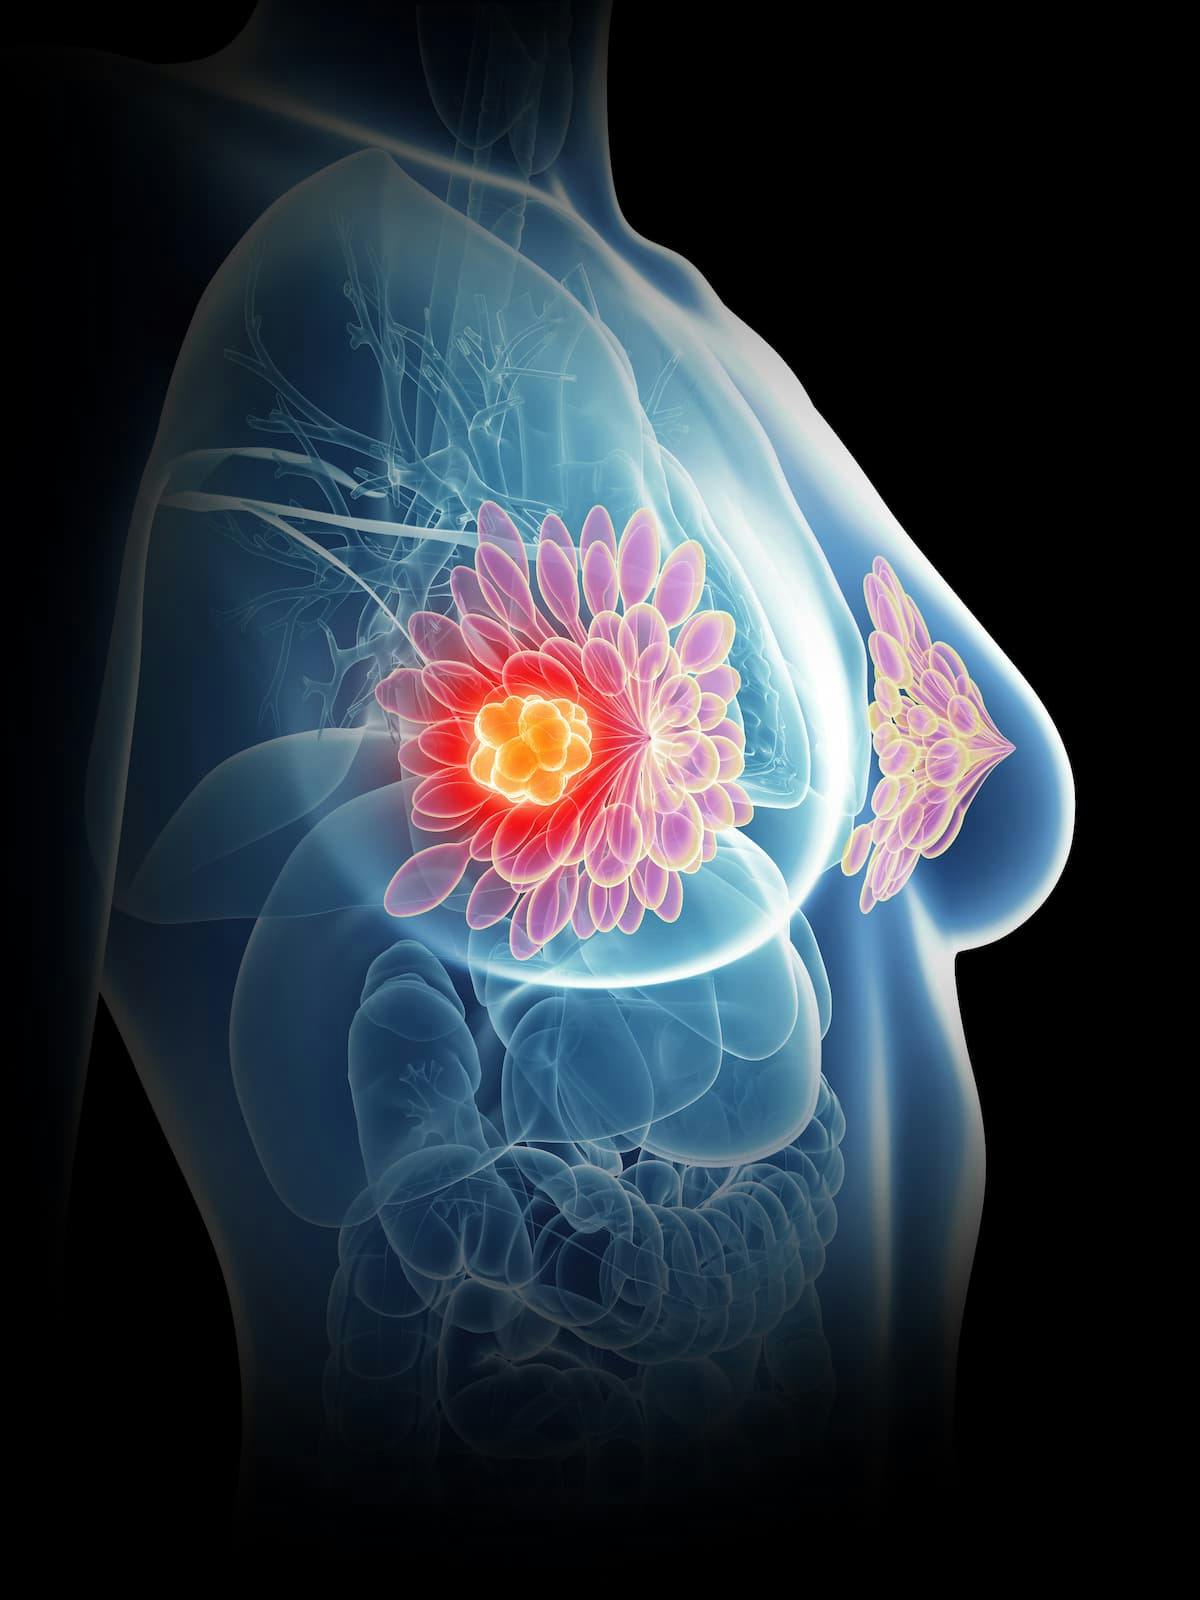 Supplemental radiation doses delivered concomitantly with hypofractionated whole breast irradiation in 15 fractions demonstrated non-inferior ipsilateral breast recurrence and similar toxicity compared with sequential boosts following whole breast irradiation in high-risk early-stage breast cancer.